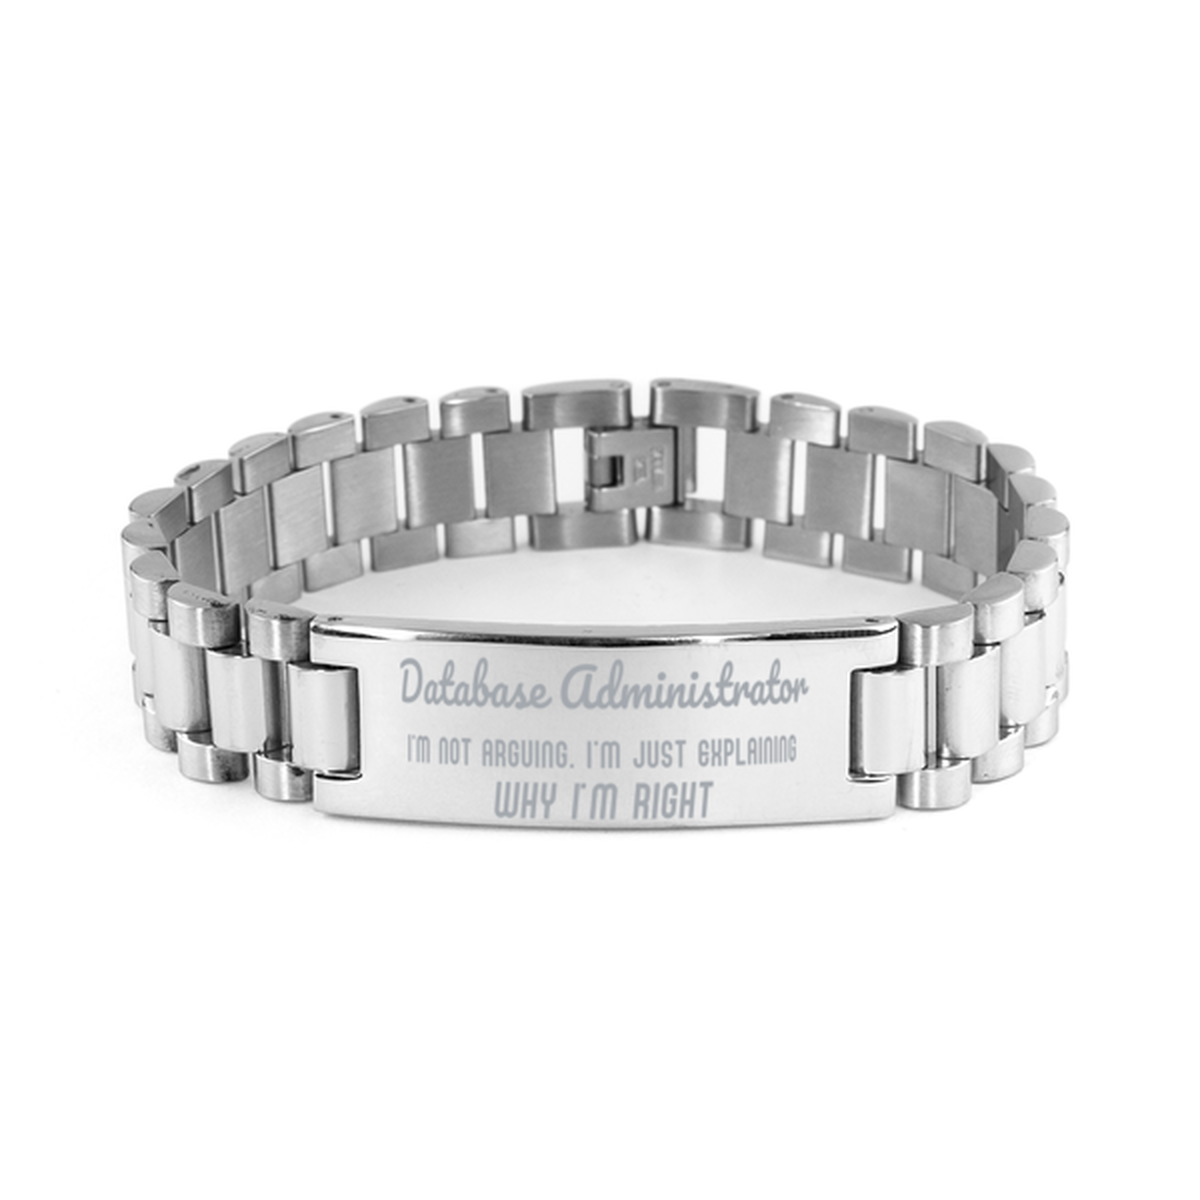 Database Administrator I'm not Arguing. I'm Just Explaining Why I'm RIGHT Ladder Stainless Steel Bracelet, Graduation Birthday Christmas Database Administrator Gifts For Database Administrator Funny Saying Quote Present for Men Women Coworker